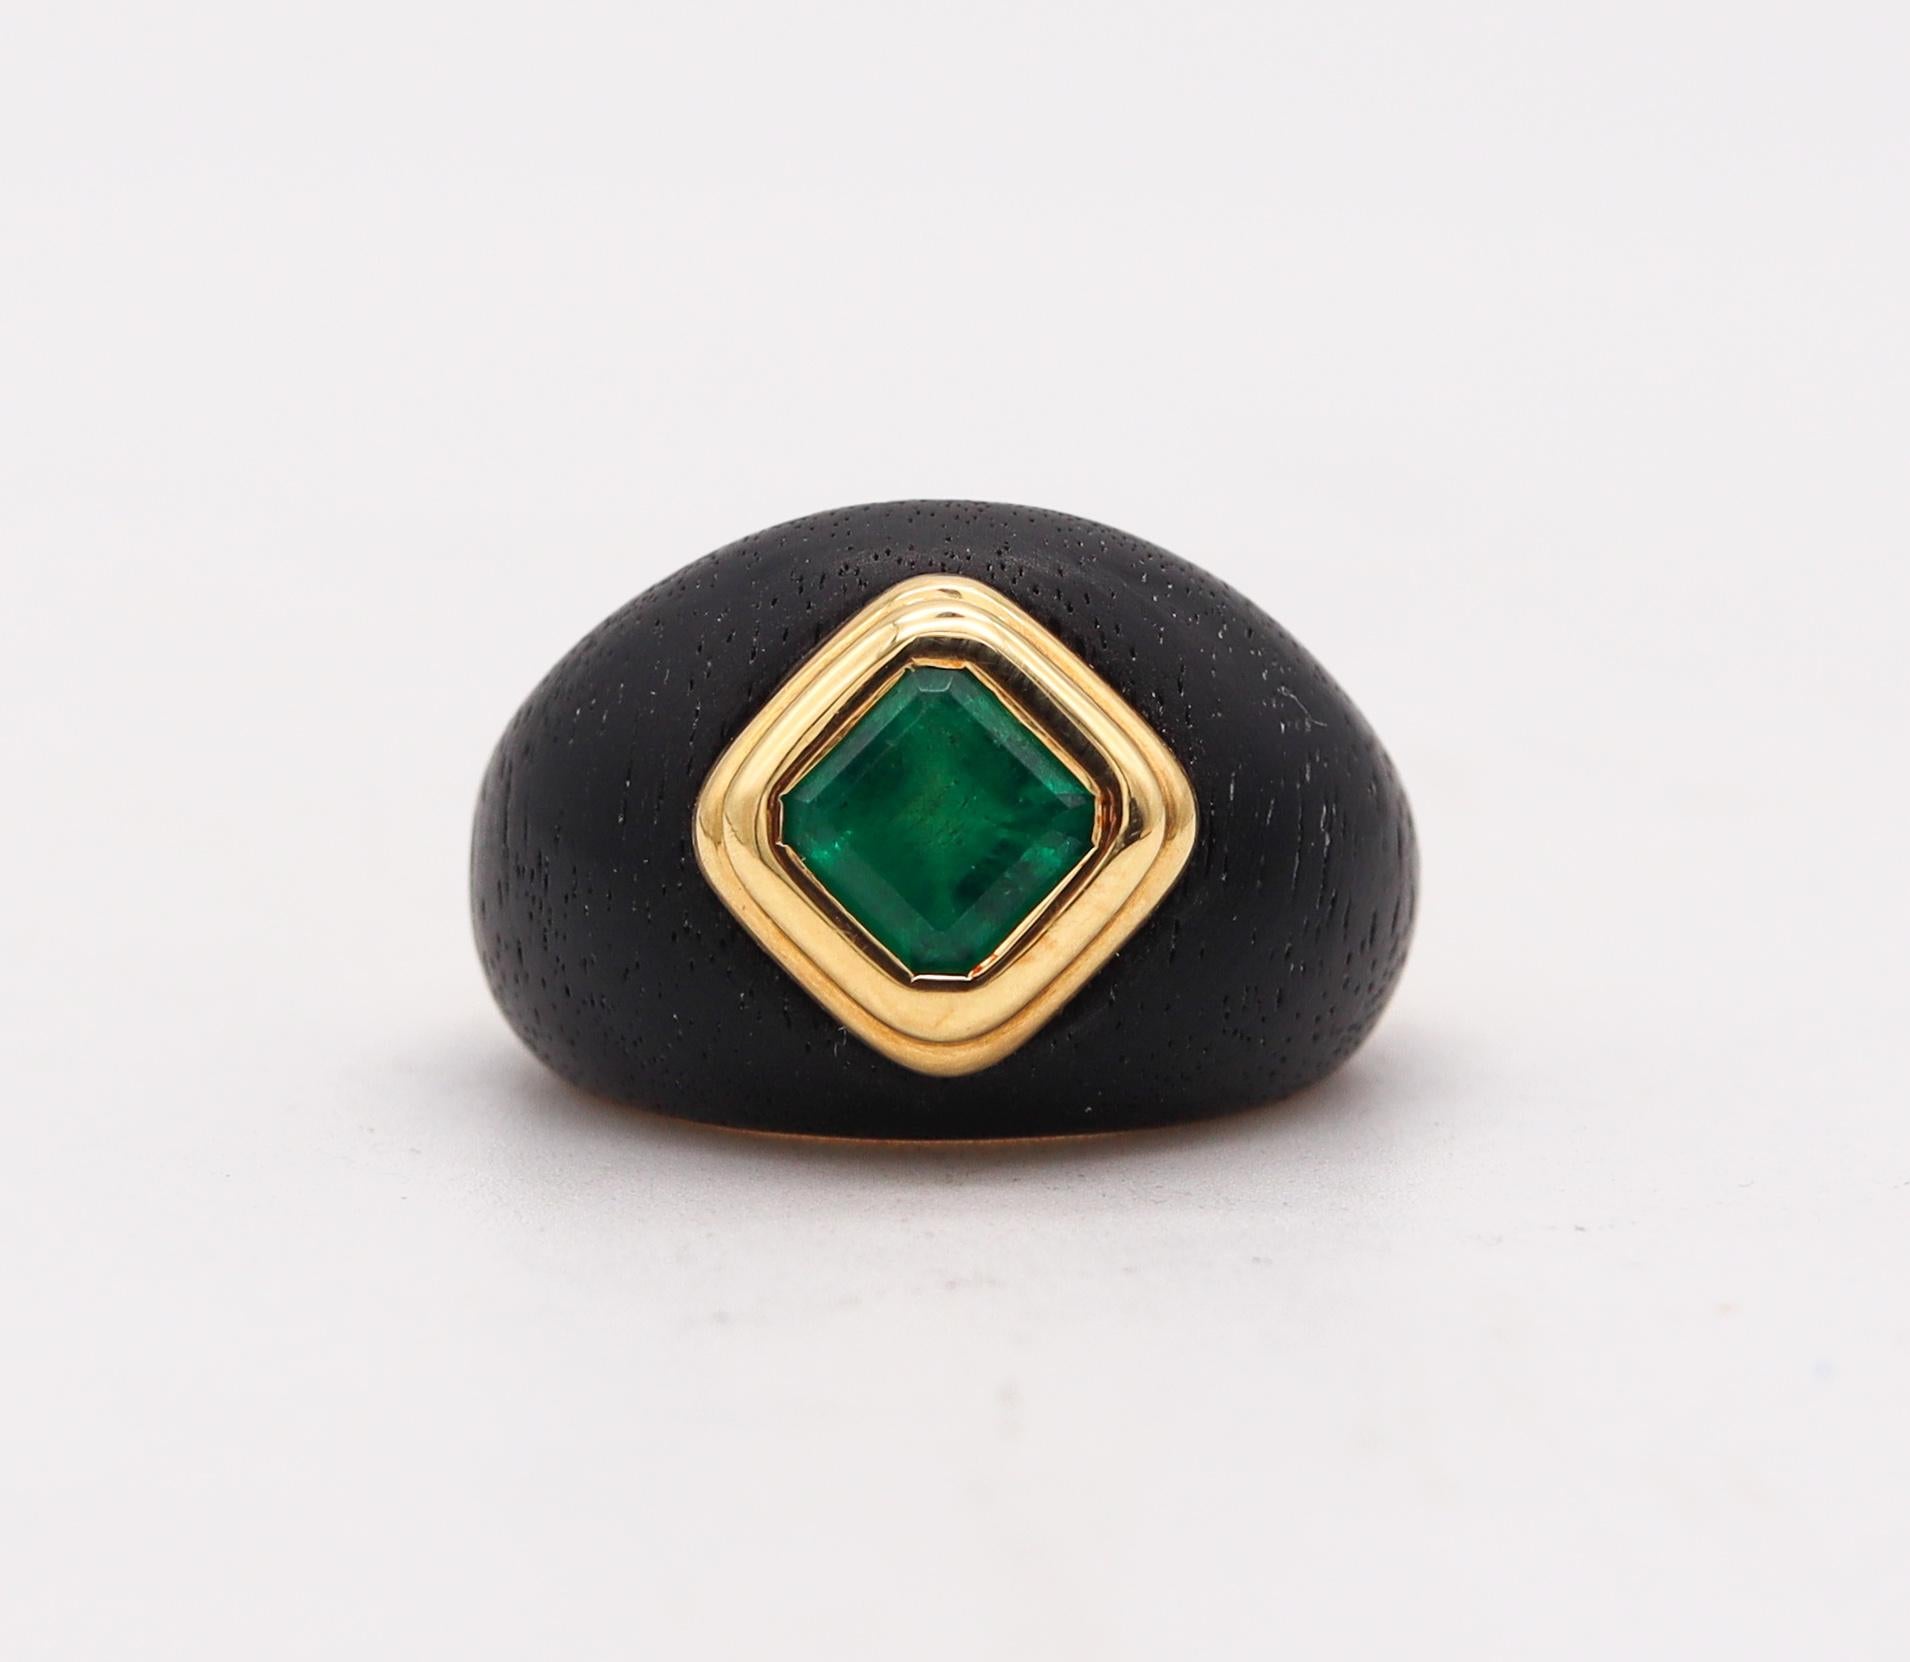 Square Cut Rene Boivin 1973 Paris Ebony Wood Cocktail Ring in 18Kt Gold & 1.77 Cts Emerald